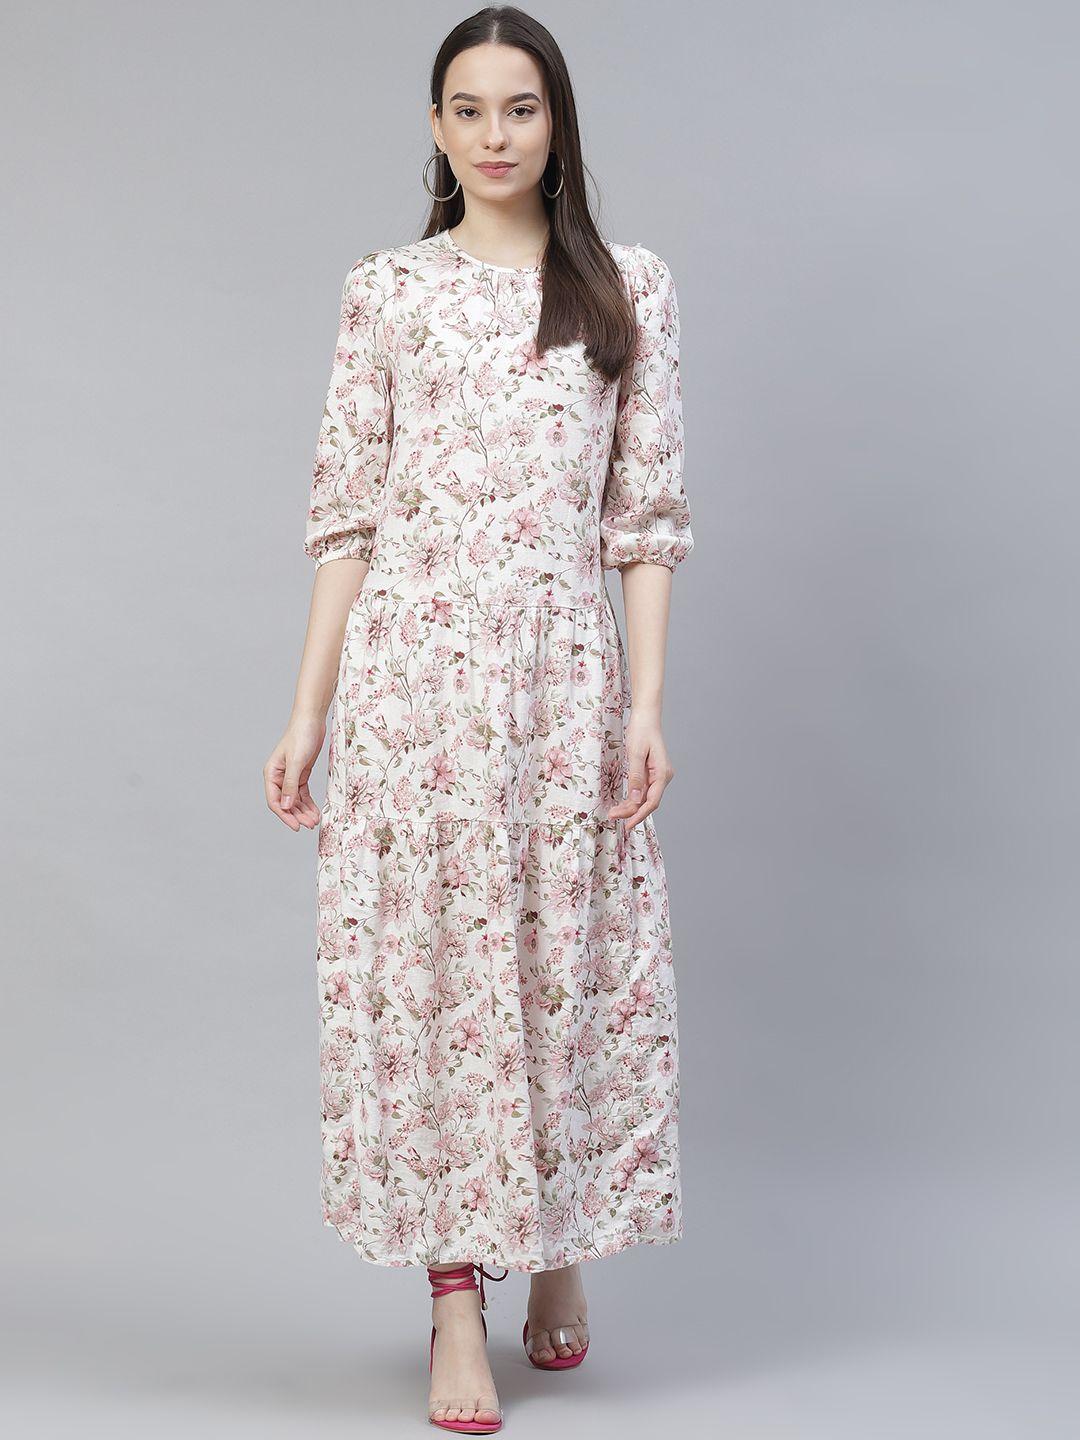 marks & spencer women off-white floral printed maxi dress